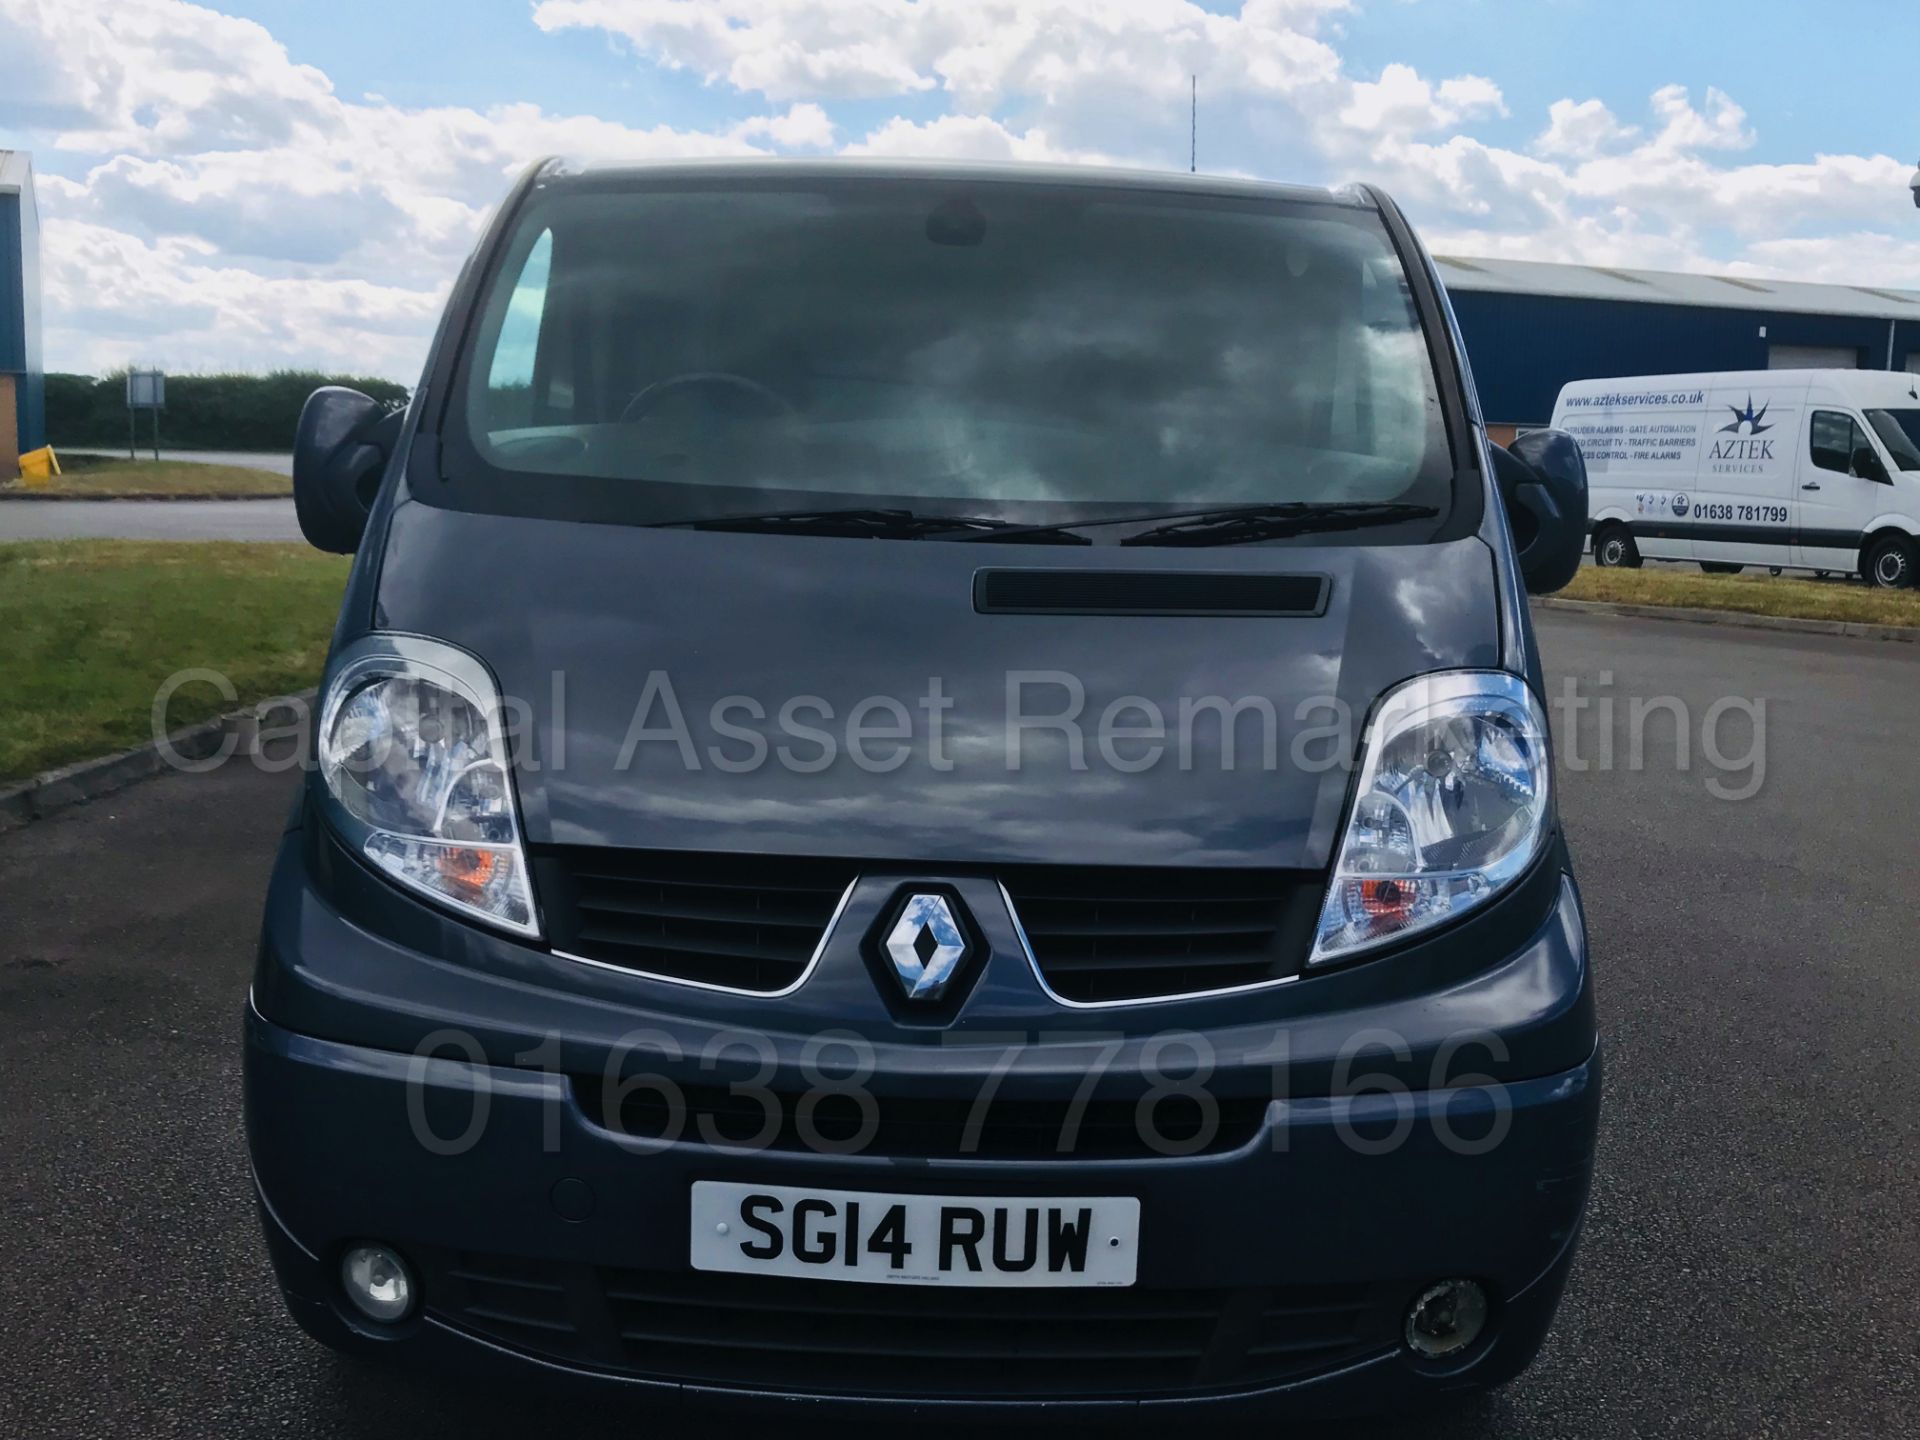 (On Sale) RENAULT TRAFIC 'SPORT EDITION' LWB (2014) '2.0 DCI - 115 BHP - 6 SPEED' *AIR CON* (NO VAT) - Image 13 of 40